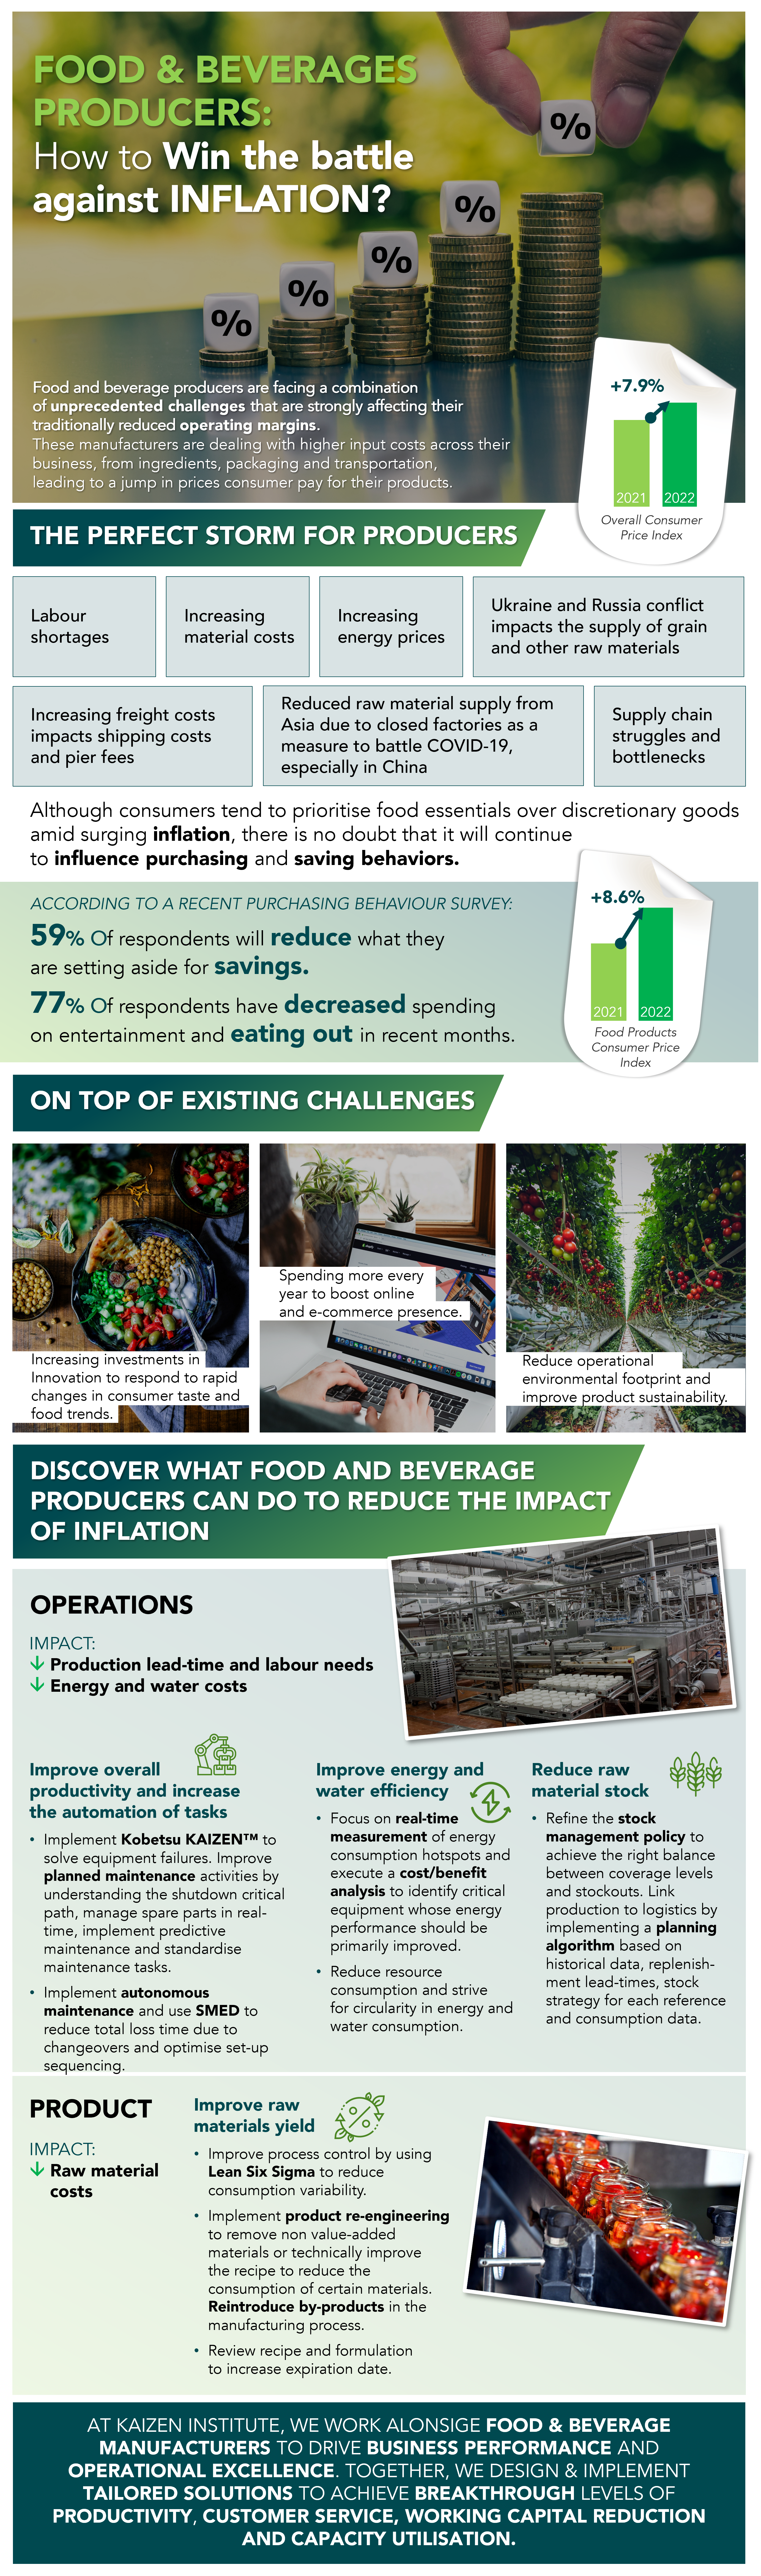 Food & Beverages Producers: How to Win the battle against INFLATION? Infographic showing the impact of inflation on food and beverage producers, including challenges such as increasing input costs, shortages in raw materials, and rising energy prices. The infographic also provides solutions for reducing the impact of inflation on operations and product, including improving productivity, reducing raw material stock, and optimizing energy and water consumption.